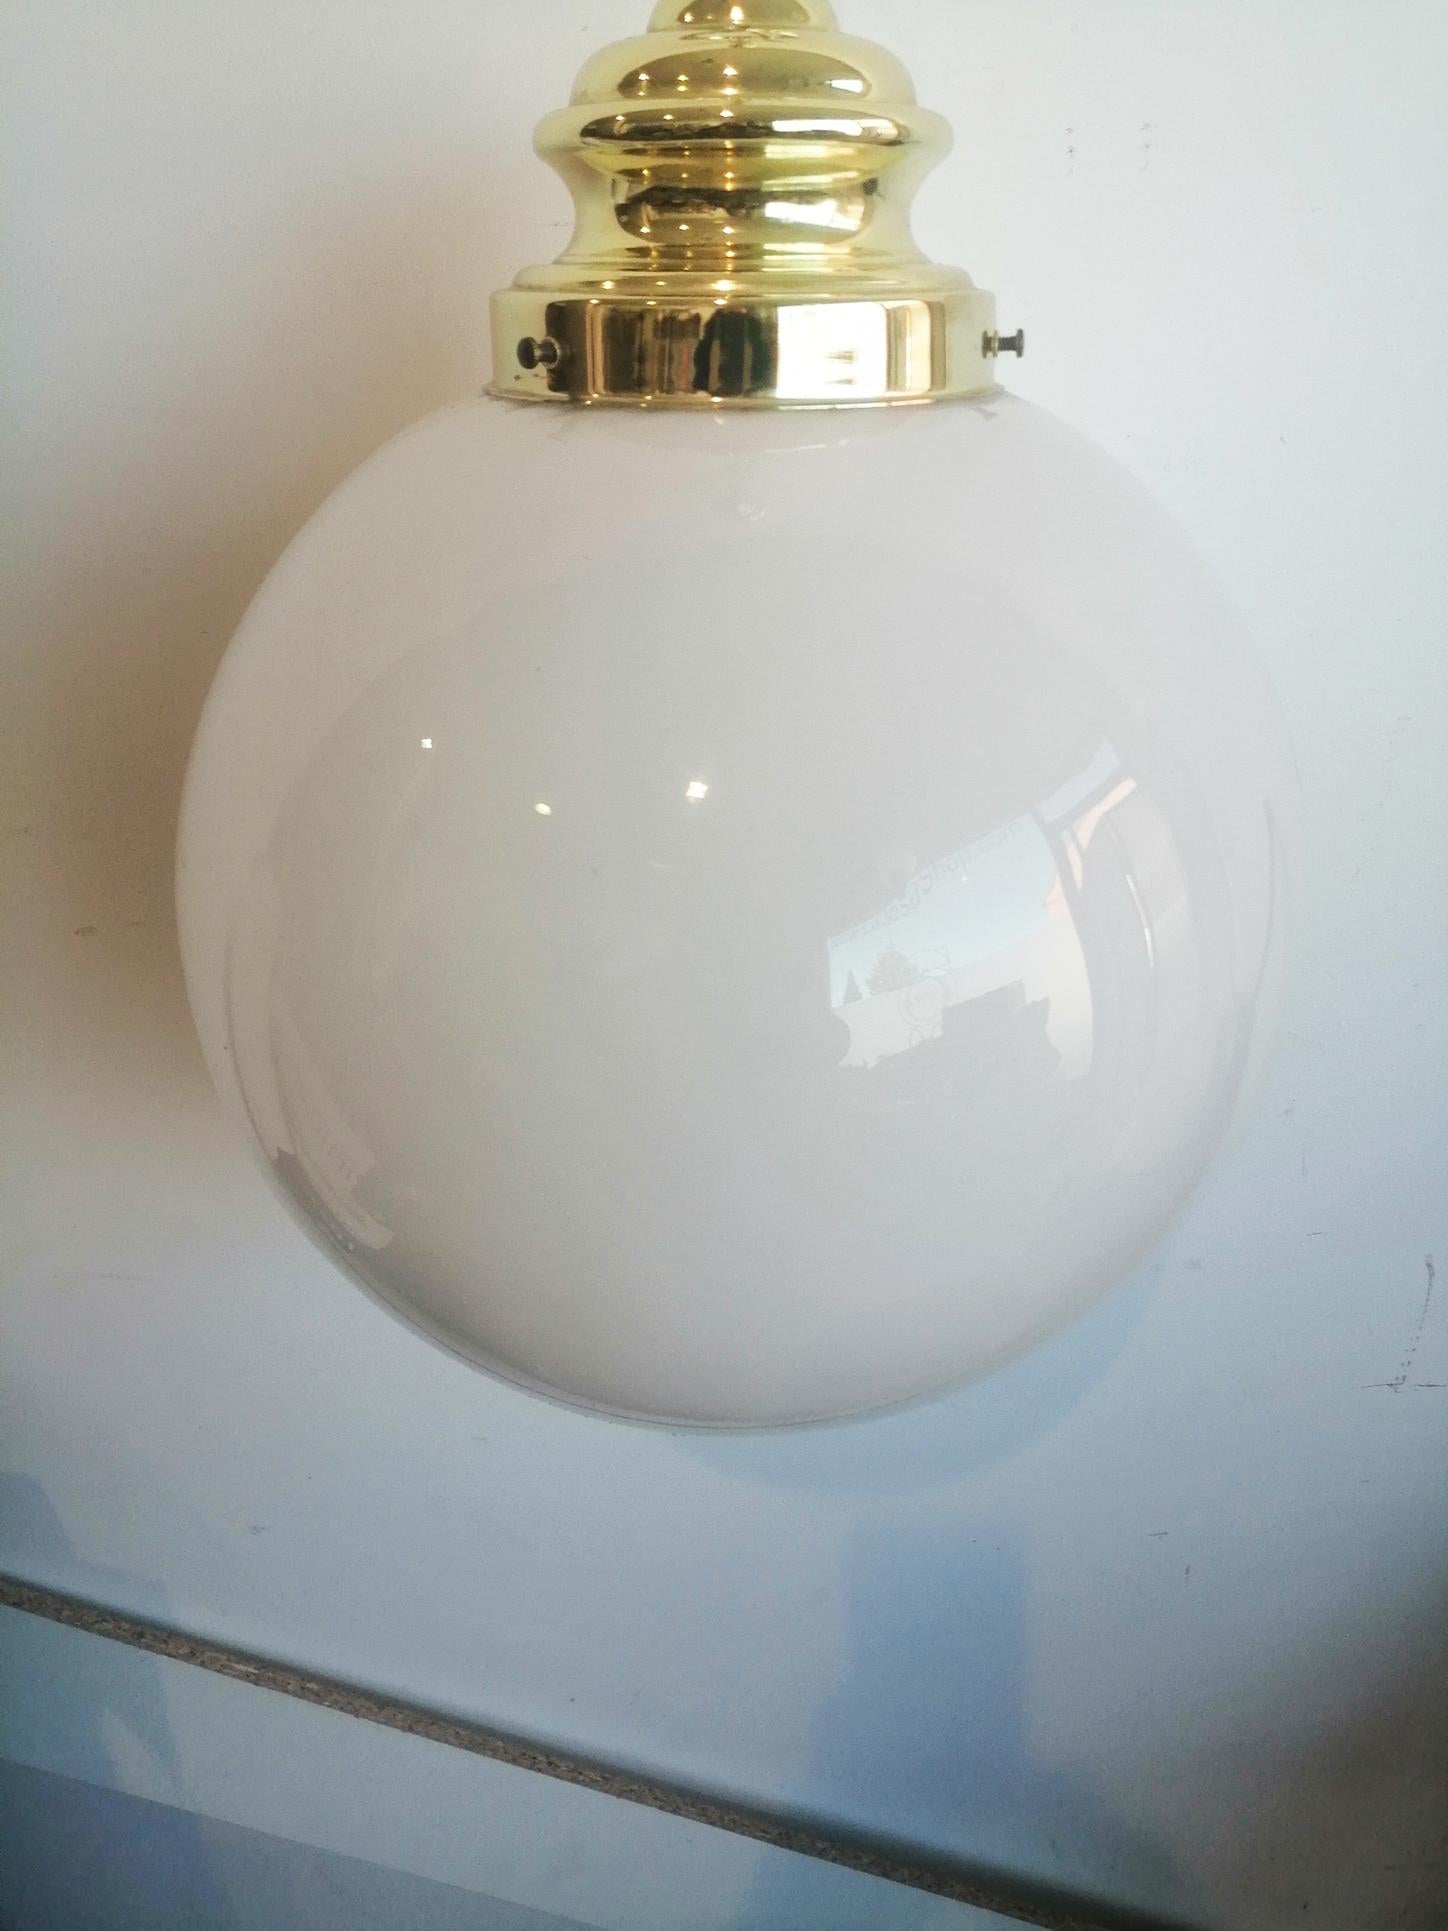 Mid-Century Modern metal crome chandelier, pendant or lantern with extra large globe in opal glass, Italy, 1950s or 1960s

This beautiful lamp is very large to be a crystal ball and is suitable to illuminate the entrance of your house or a